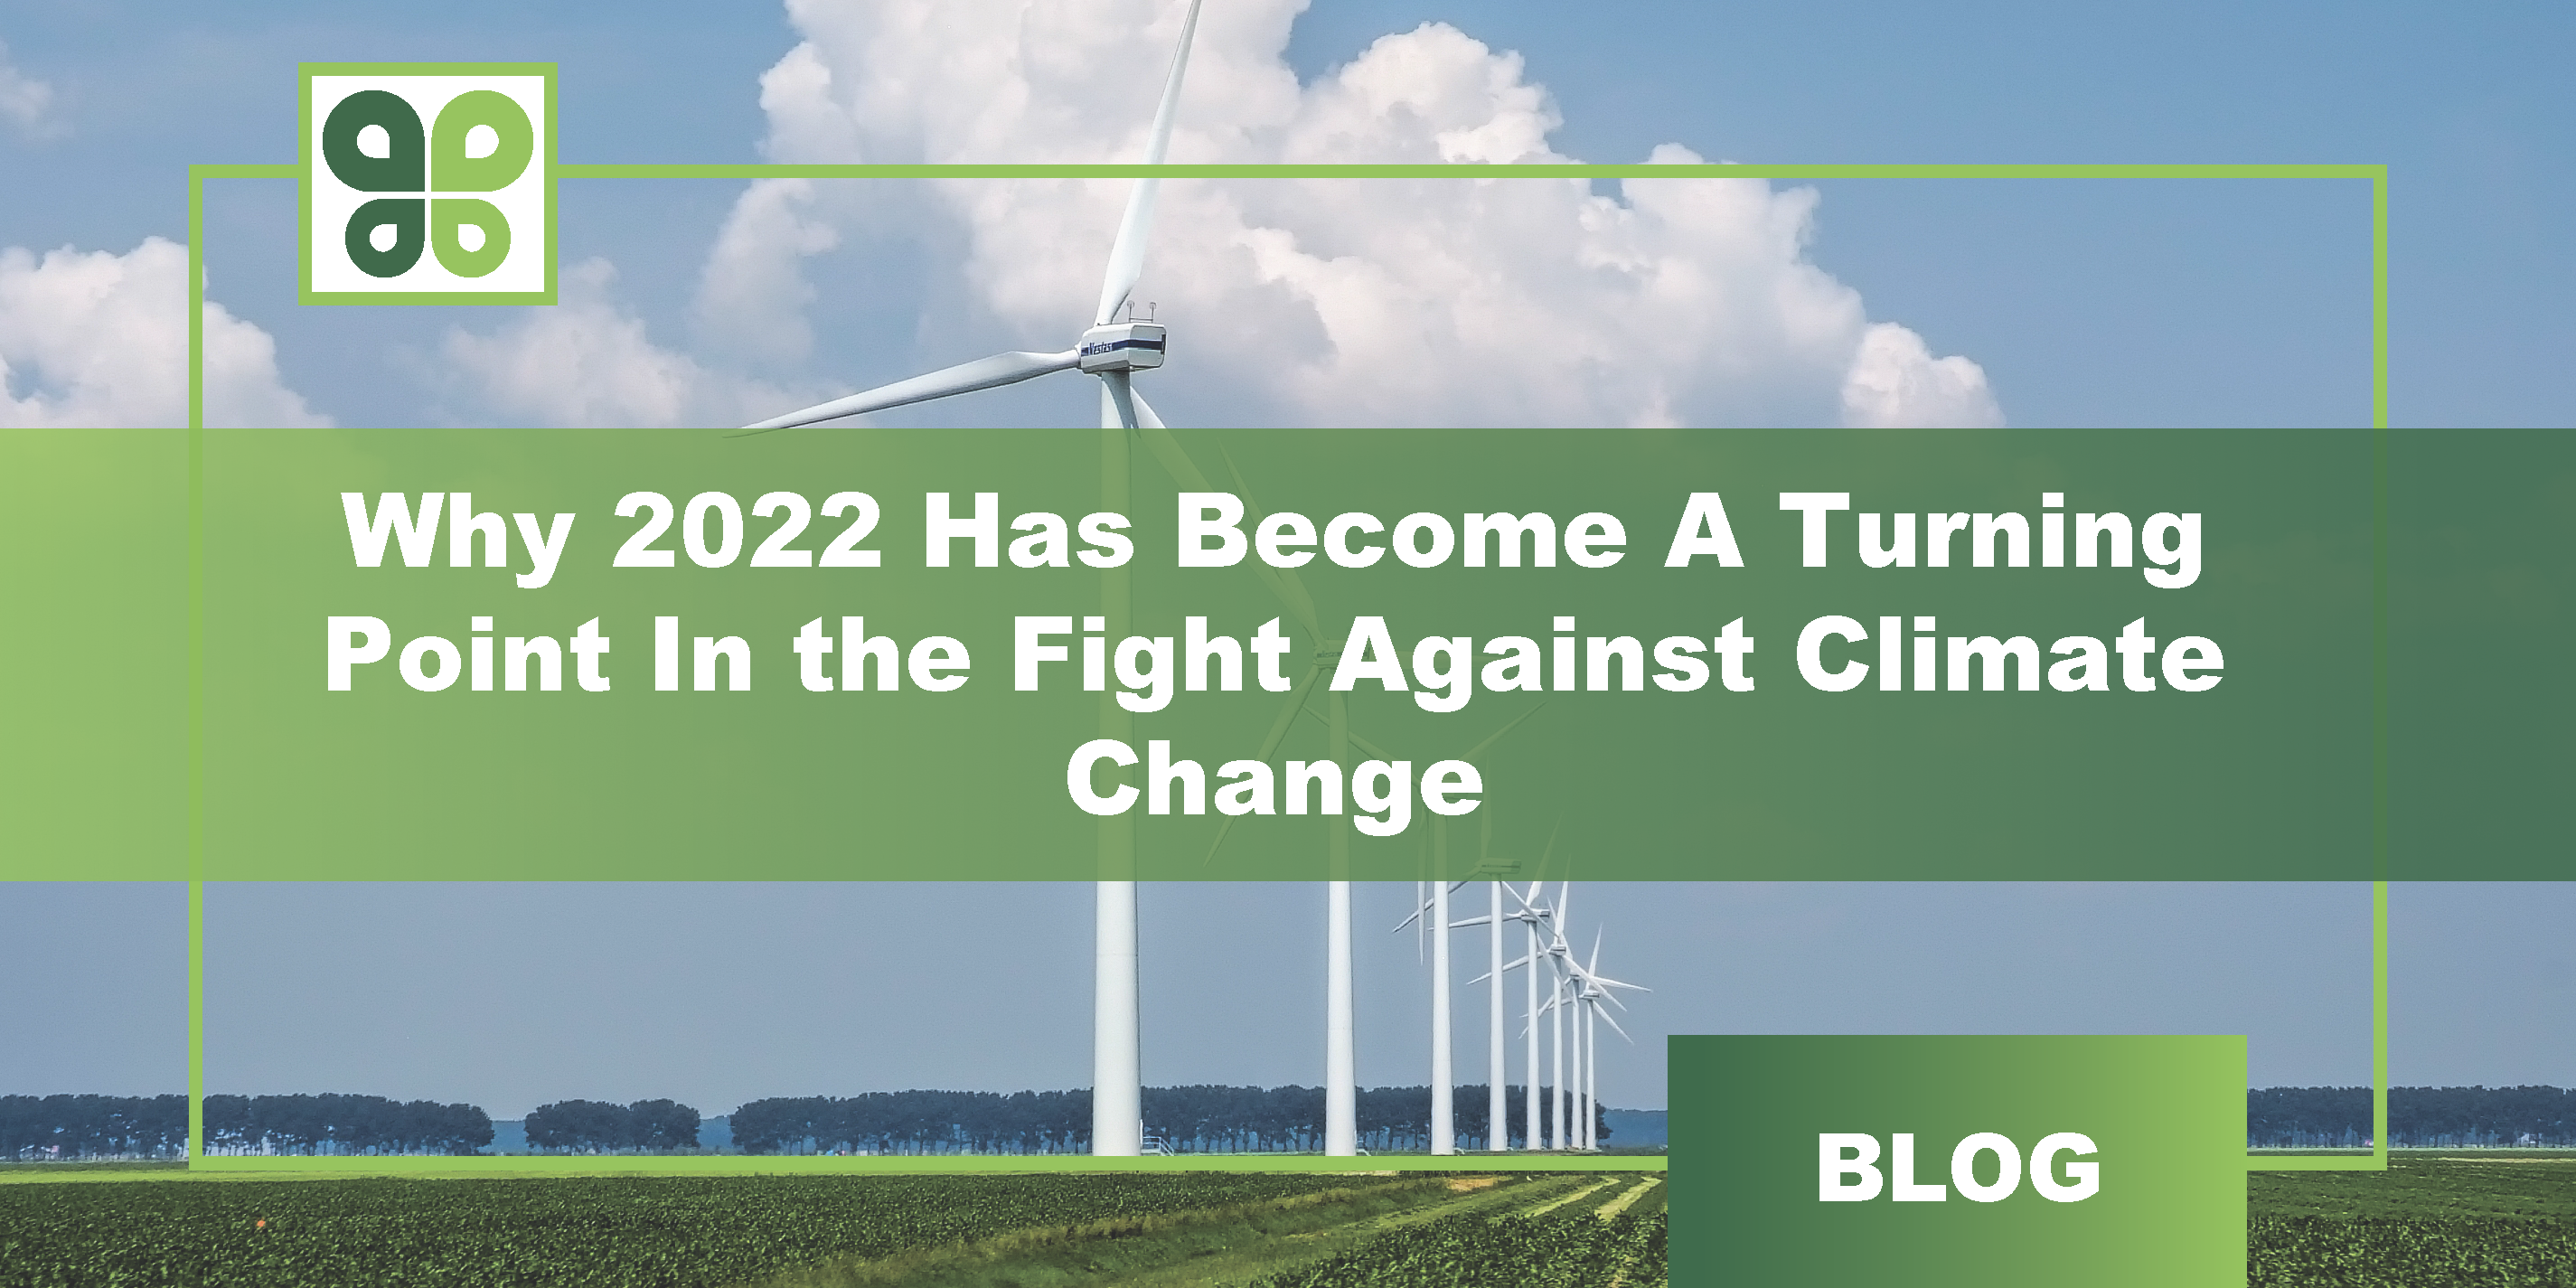 Why 2022 Has Become A Turning Point In the Fight Against Climate Change